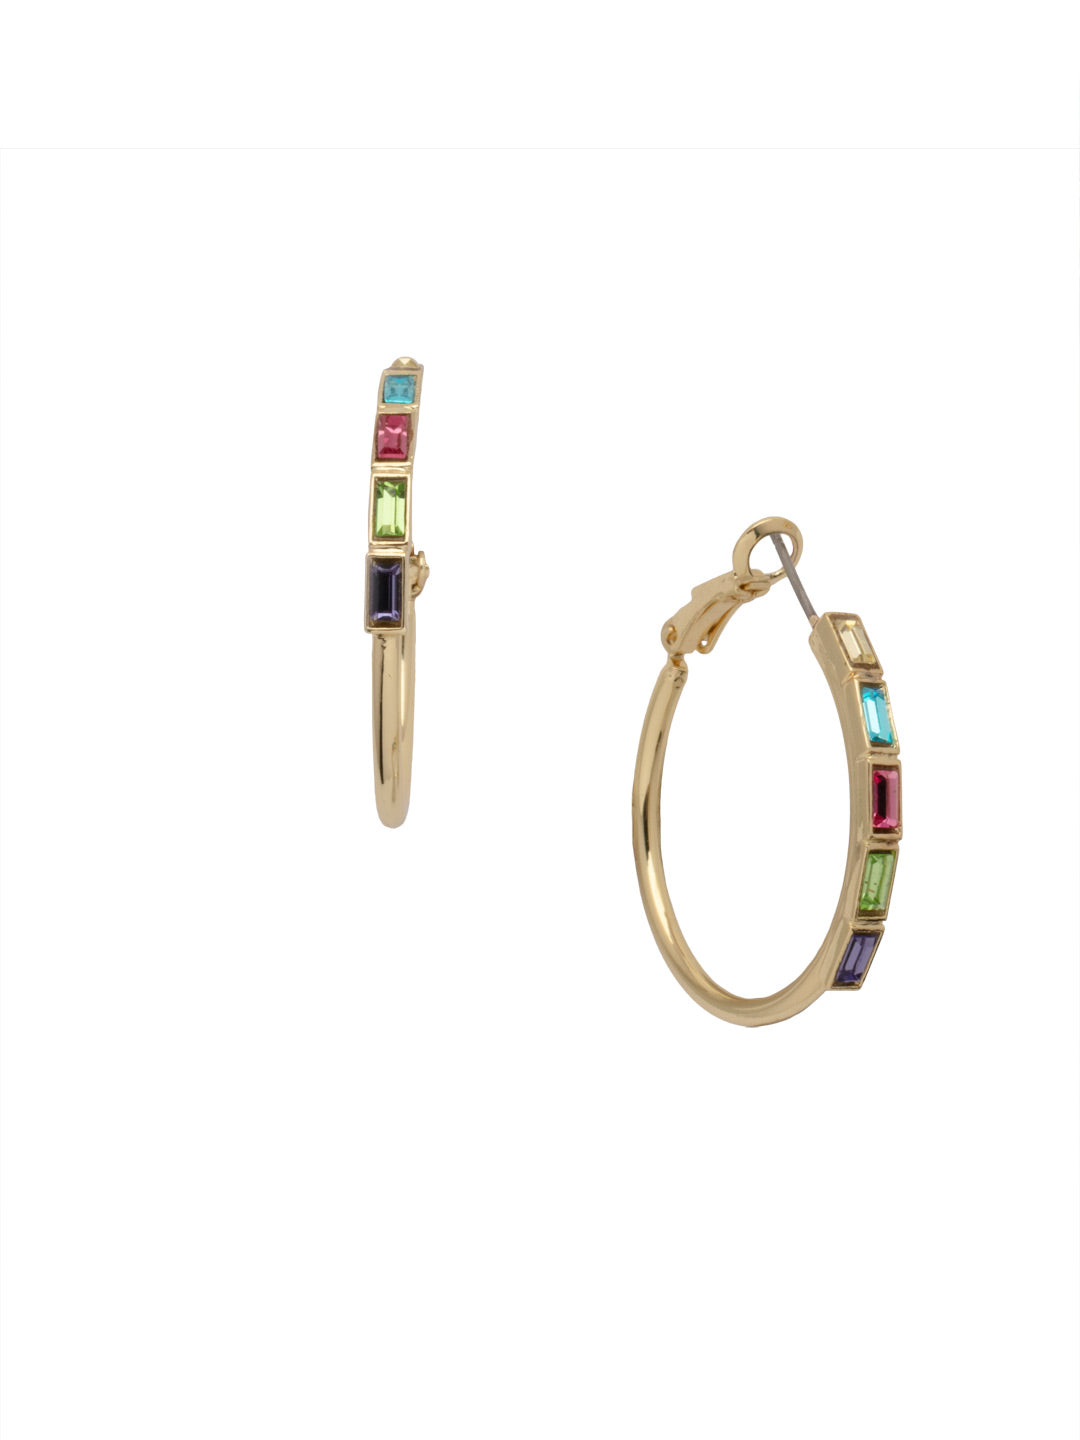 Jill Hoop Earring - EEY23BGHBR - <p>Square cut crystals embellish classic round hoops to create the trendy Jill Hoop Earrings. From Sorrelli's Happy Birthday Redux collection in our Bright Gold-tone finish.</p>